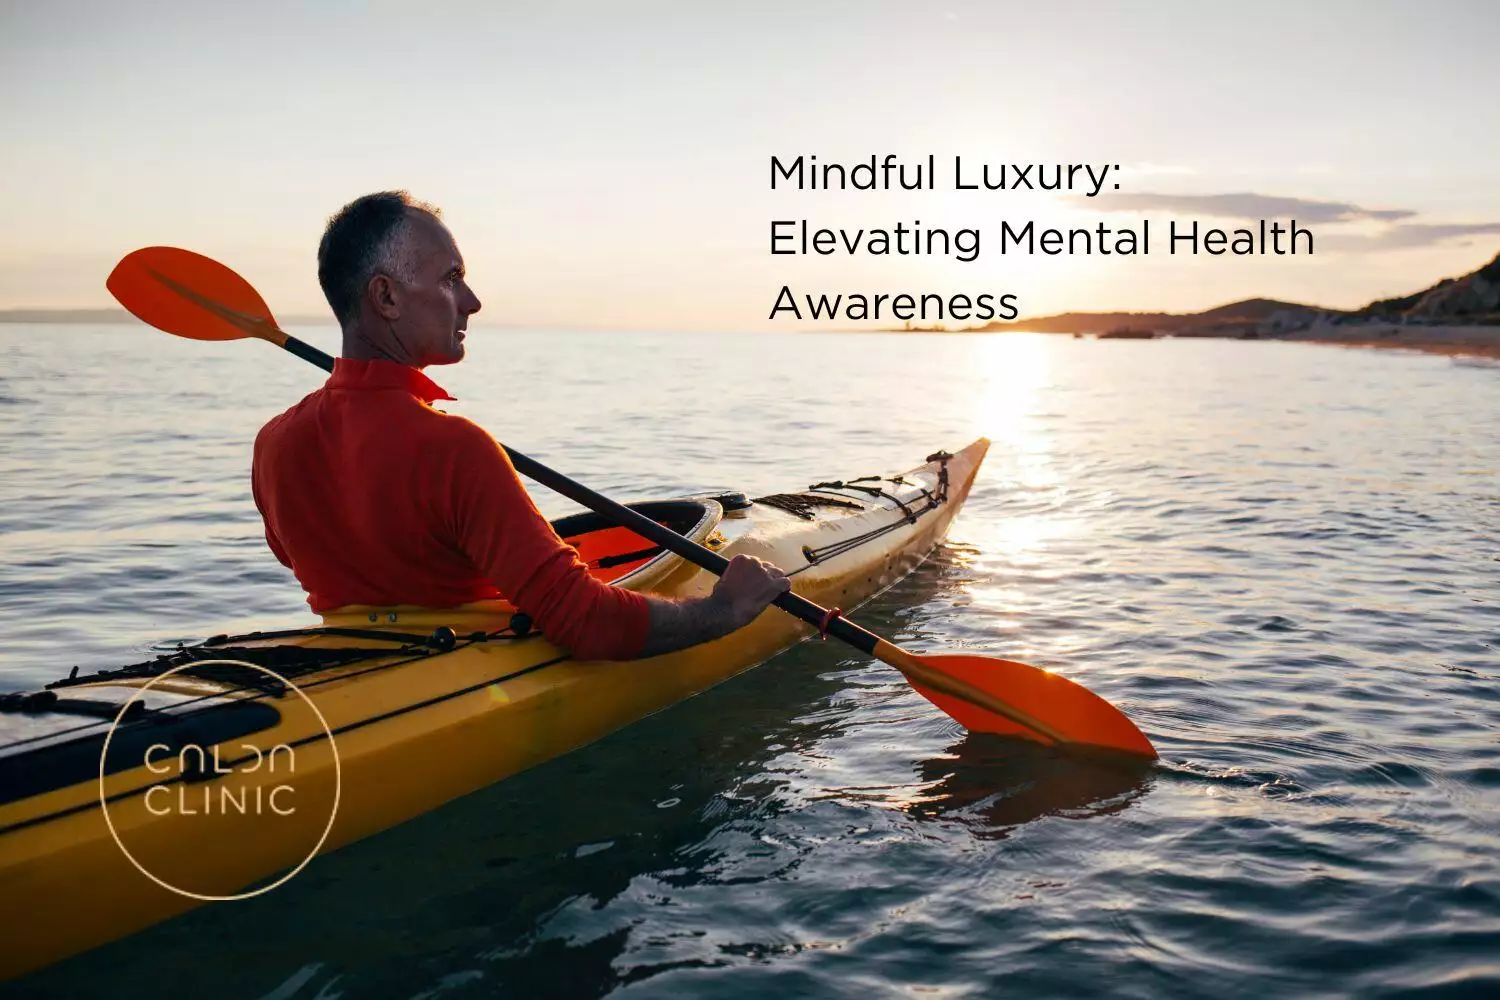 Mindful Luxury Elevating Mental Health Awareness. Rich man relaxing on a kayak while on vacation.